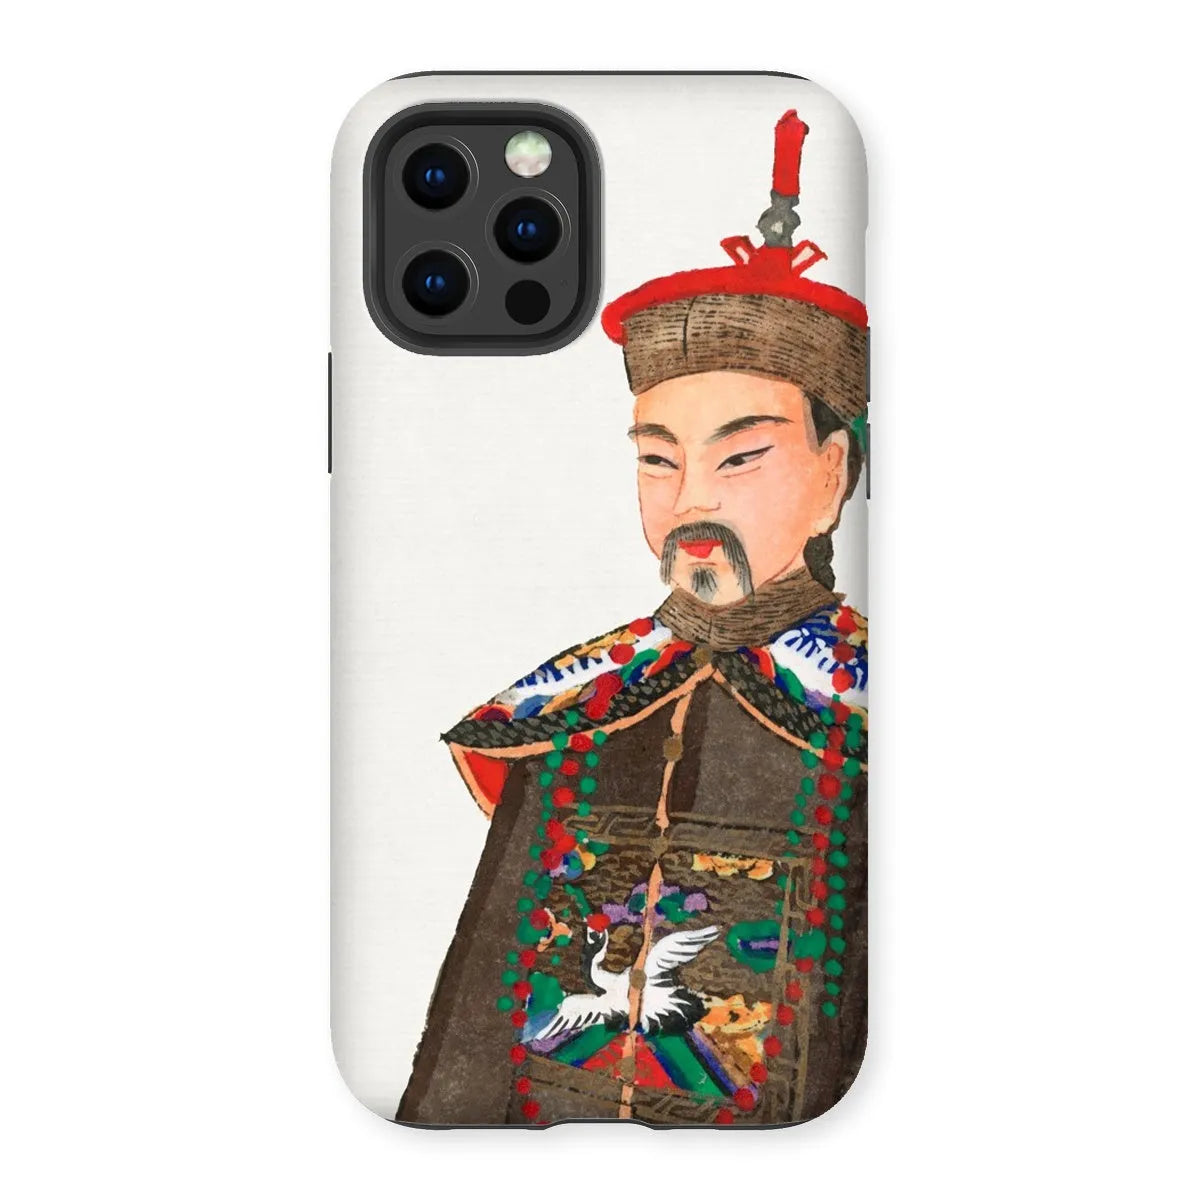 Nobleman At Court - Chinese Aesthetic Manchu Art Phone Case - Iphone 12 Pro / Matte - Mobile Phone Cases - Aesthetic Art